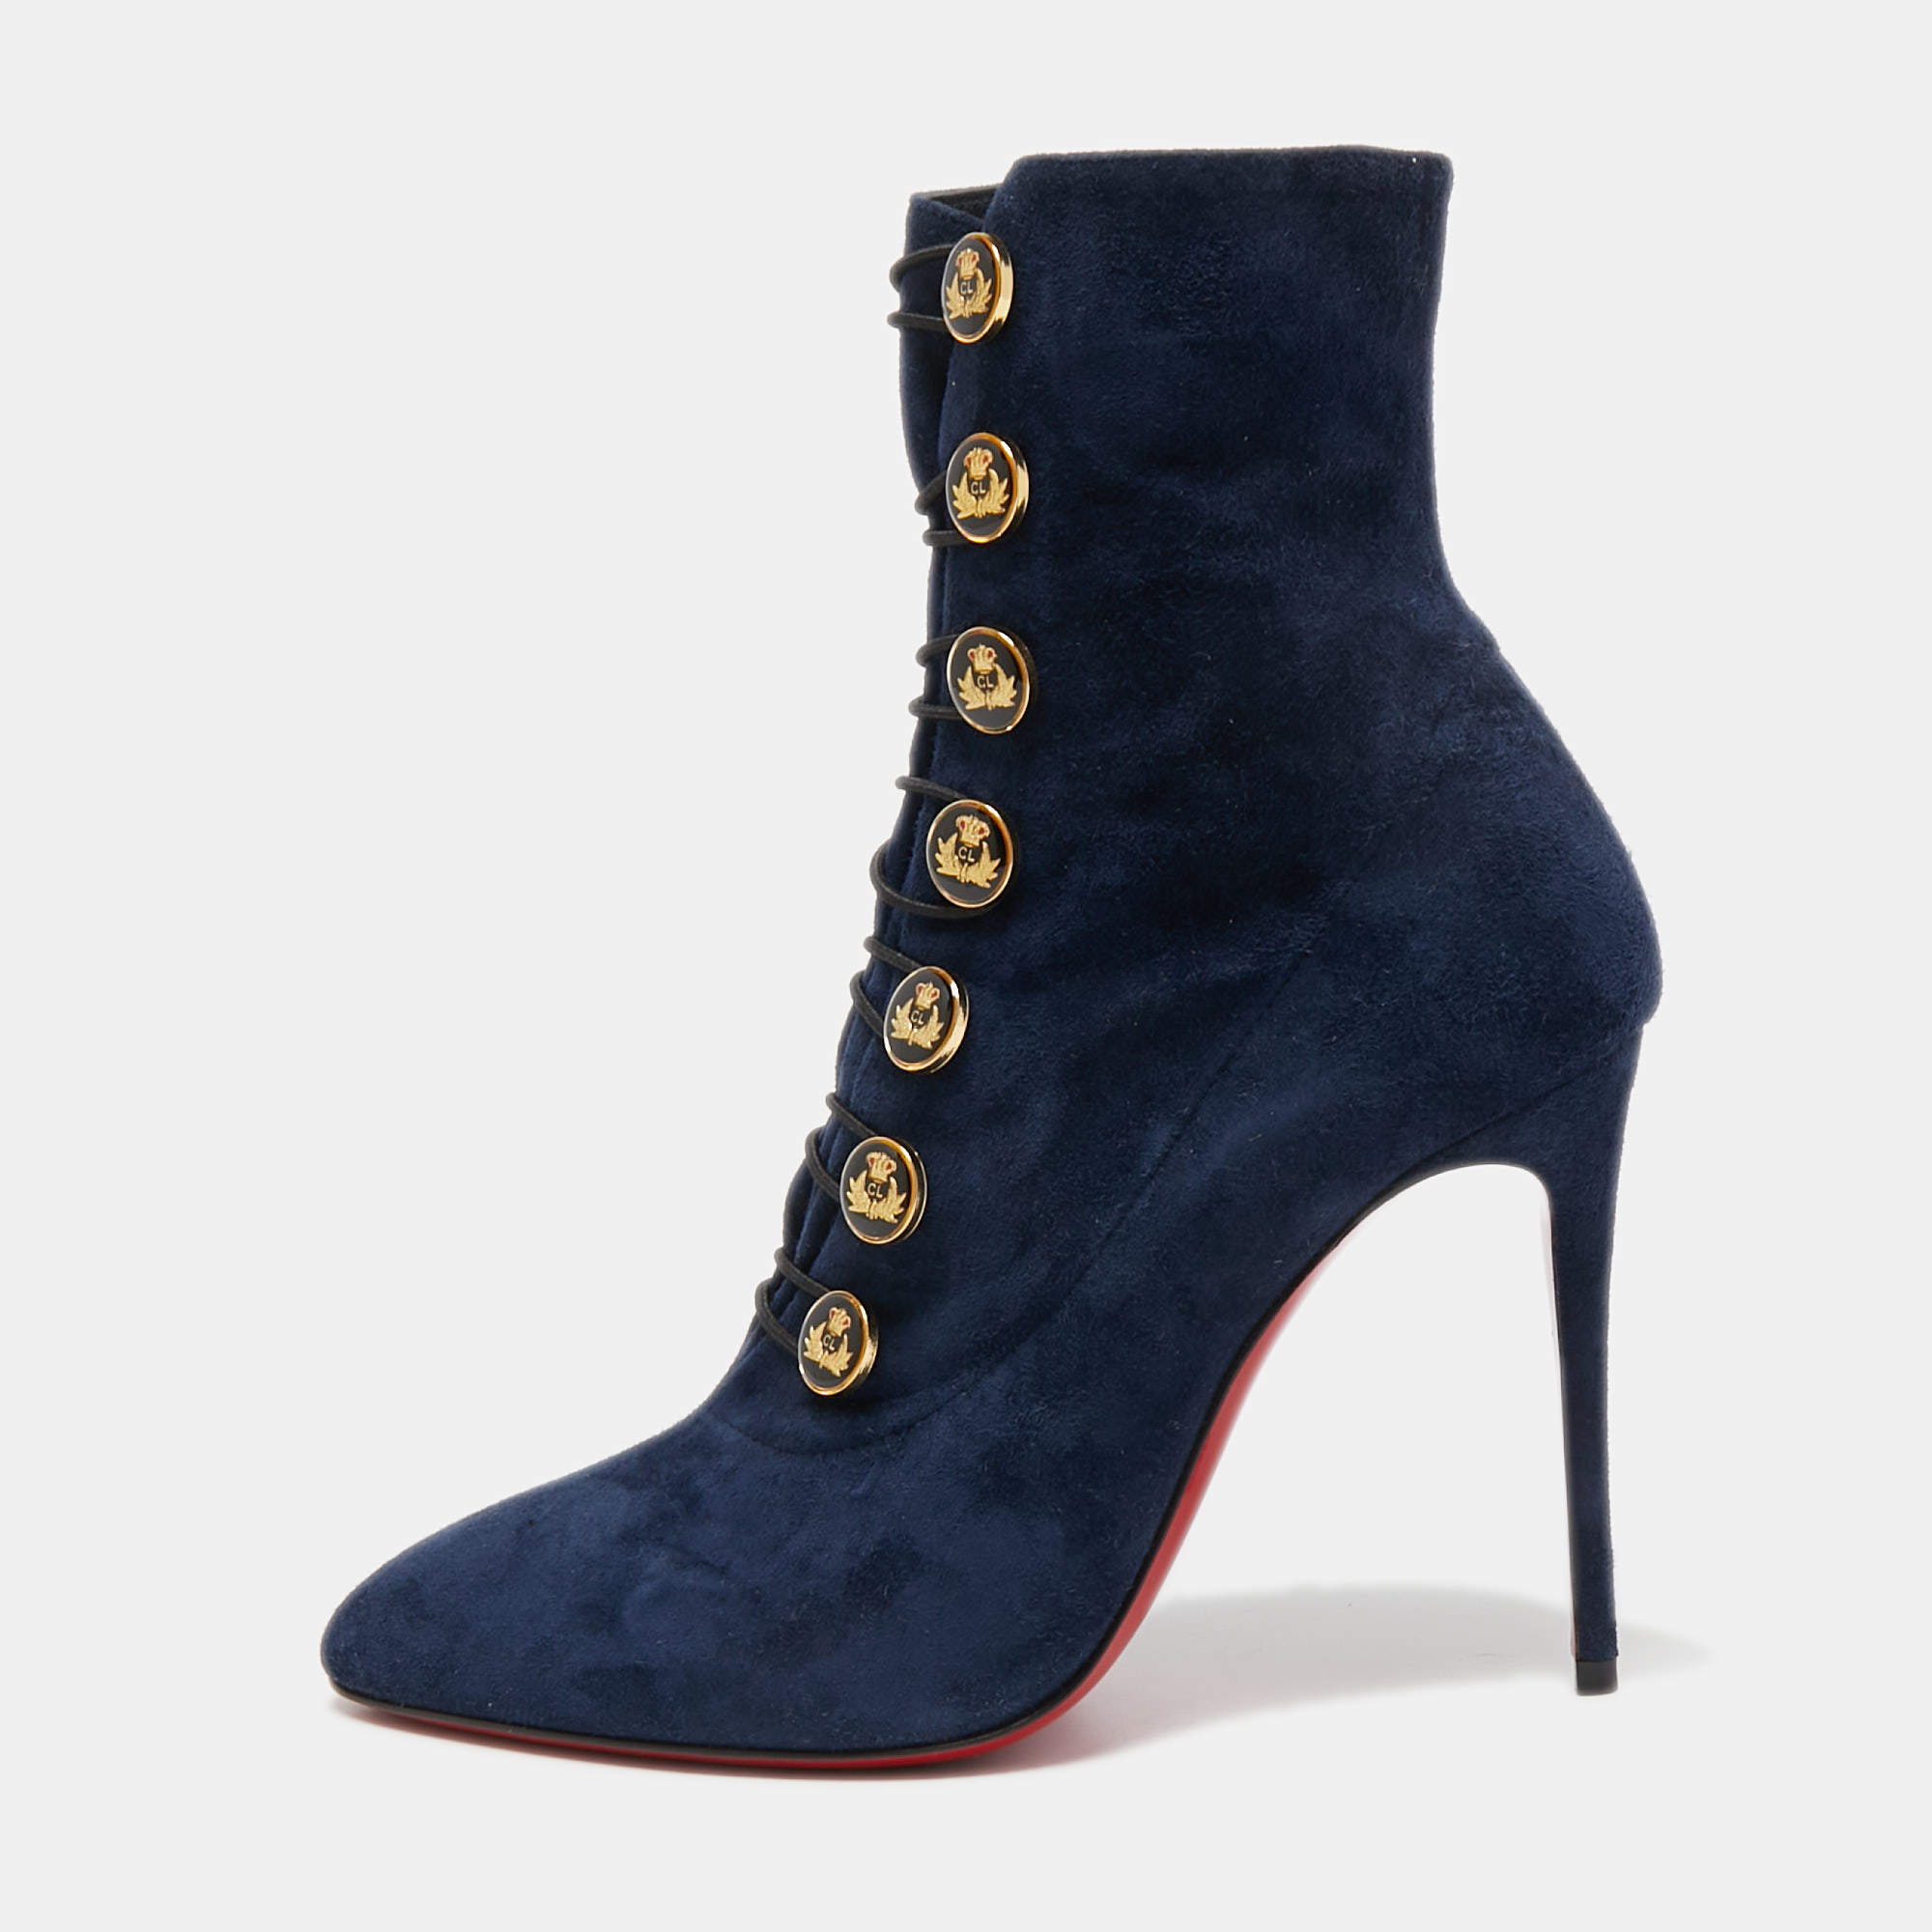 Christian Navy Blue Frenchissima Ankle Boots Size Christian Louboutin | TLC